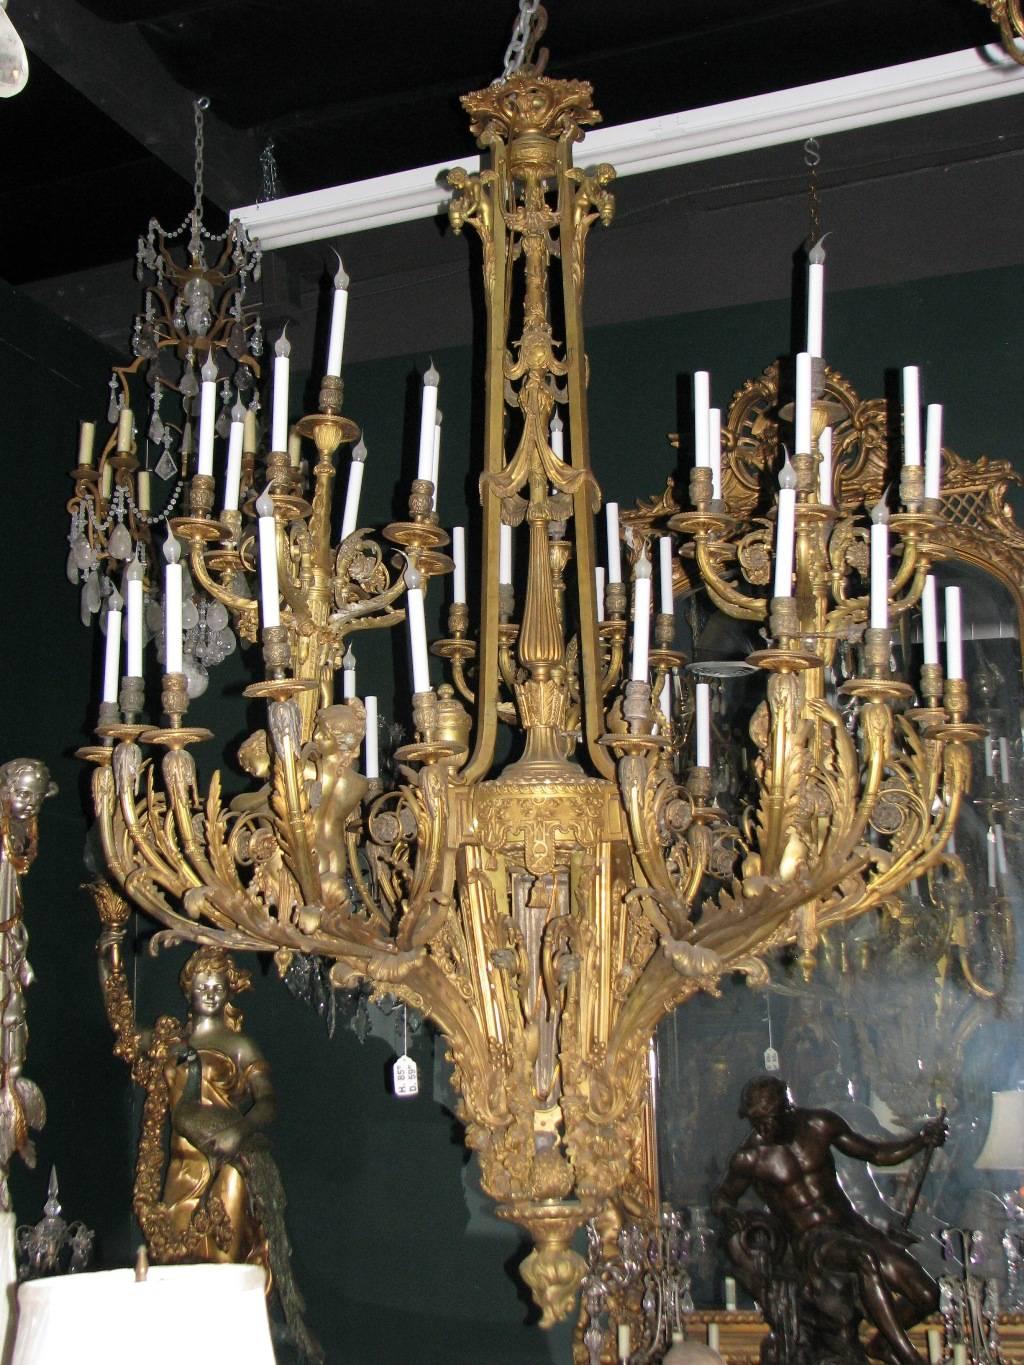 Extraordinary and enormous French Louis XV style bronze figural thirty-nine-light chandelier, 20th century. 
The top of the central shaft begins with three small angels holding floral urns located between three scrolling swags above three beautiful